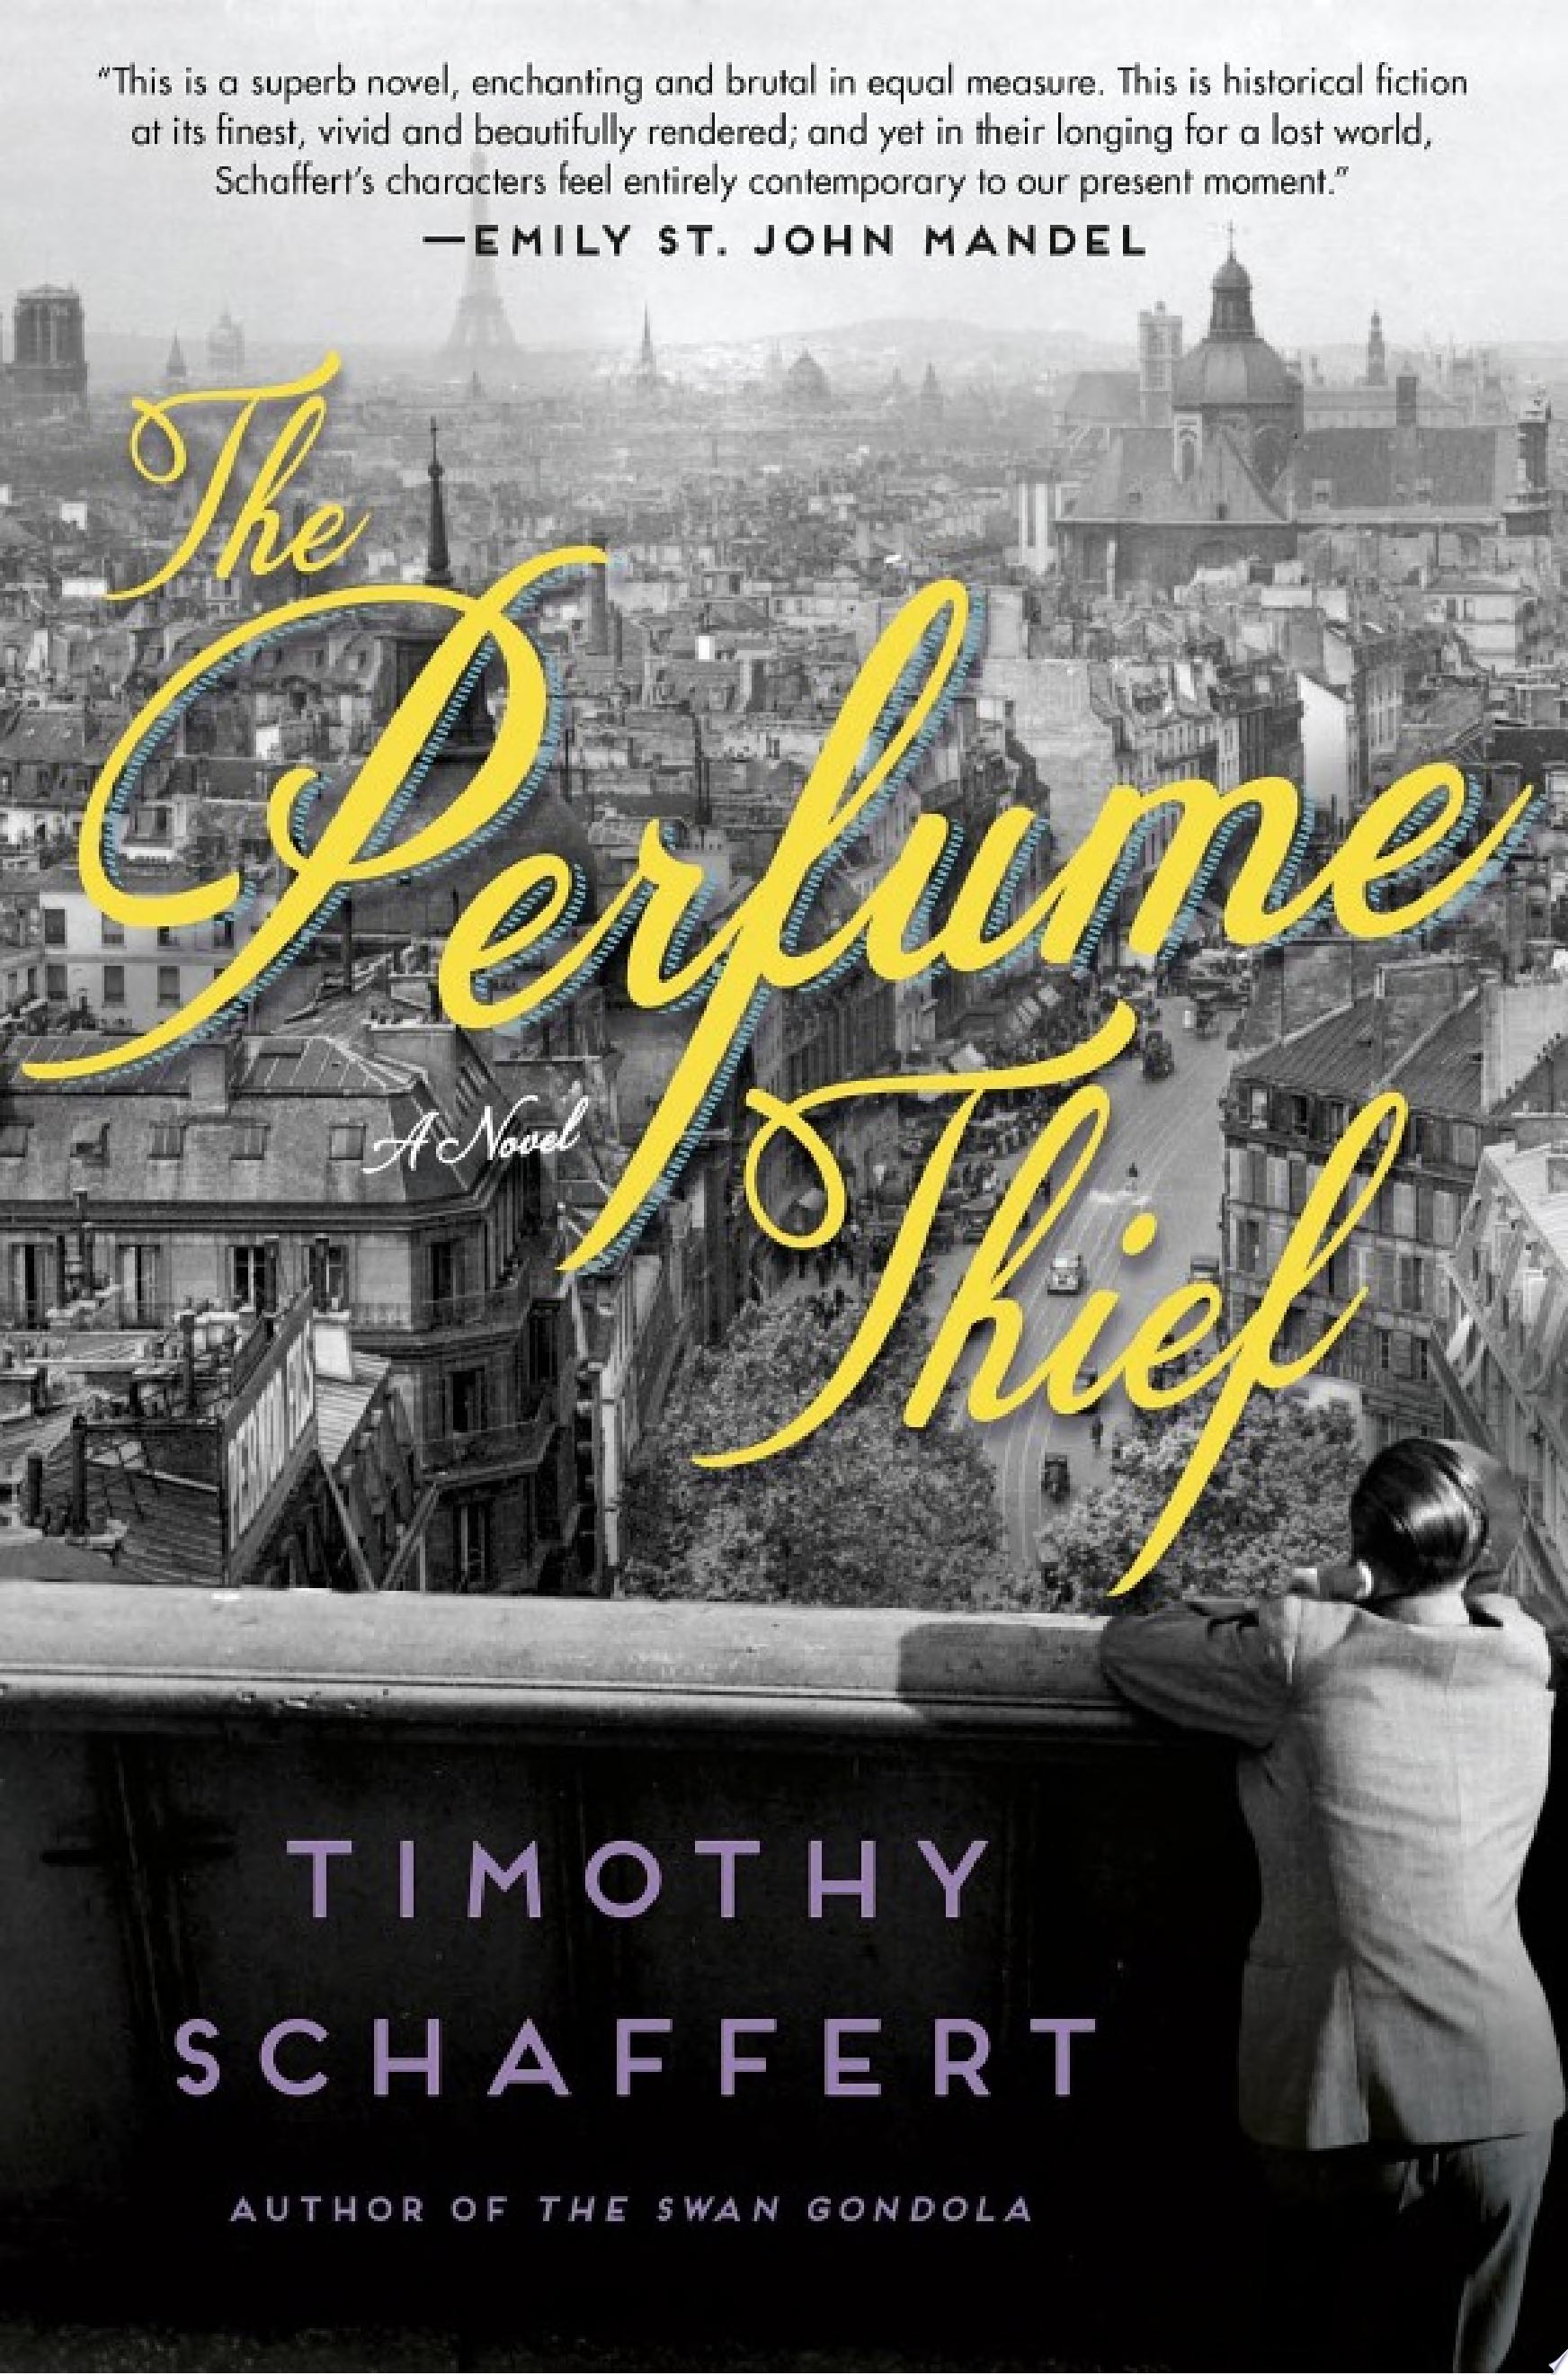 Image for "The Perfume Thief"